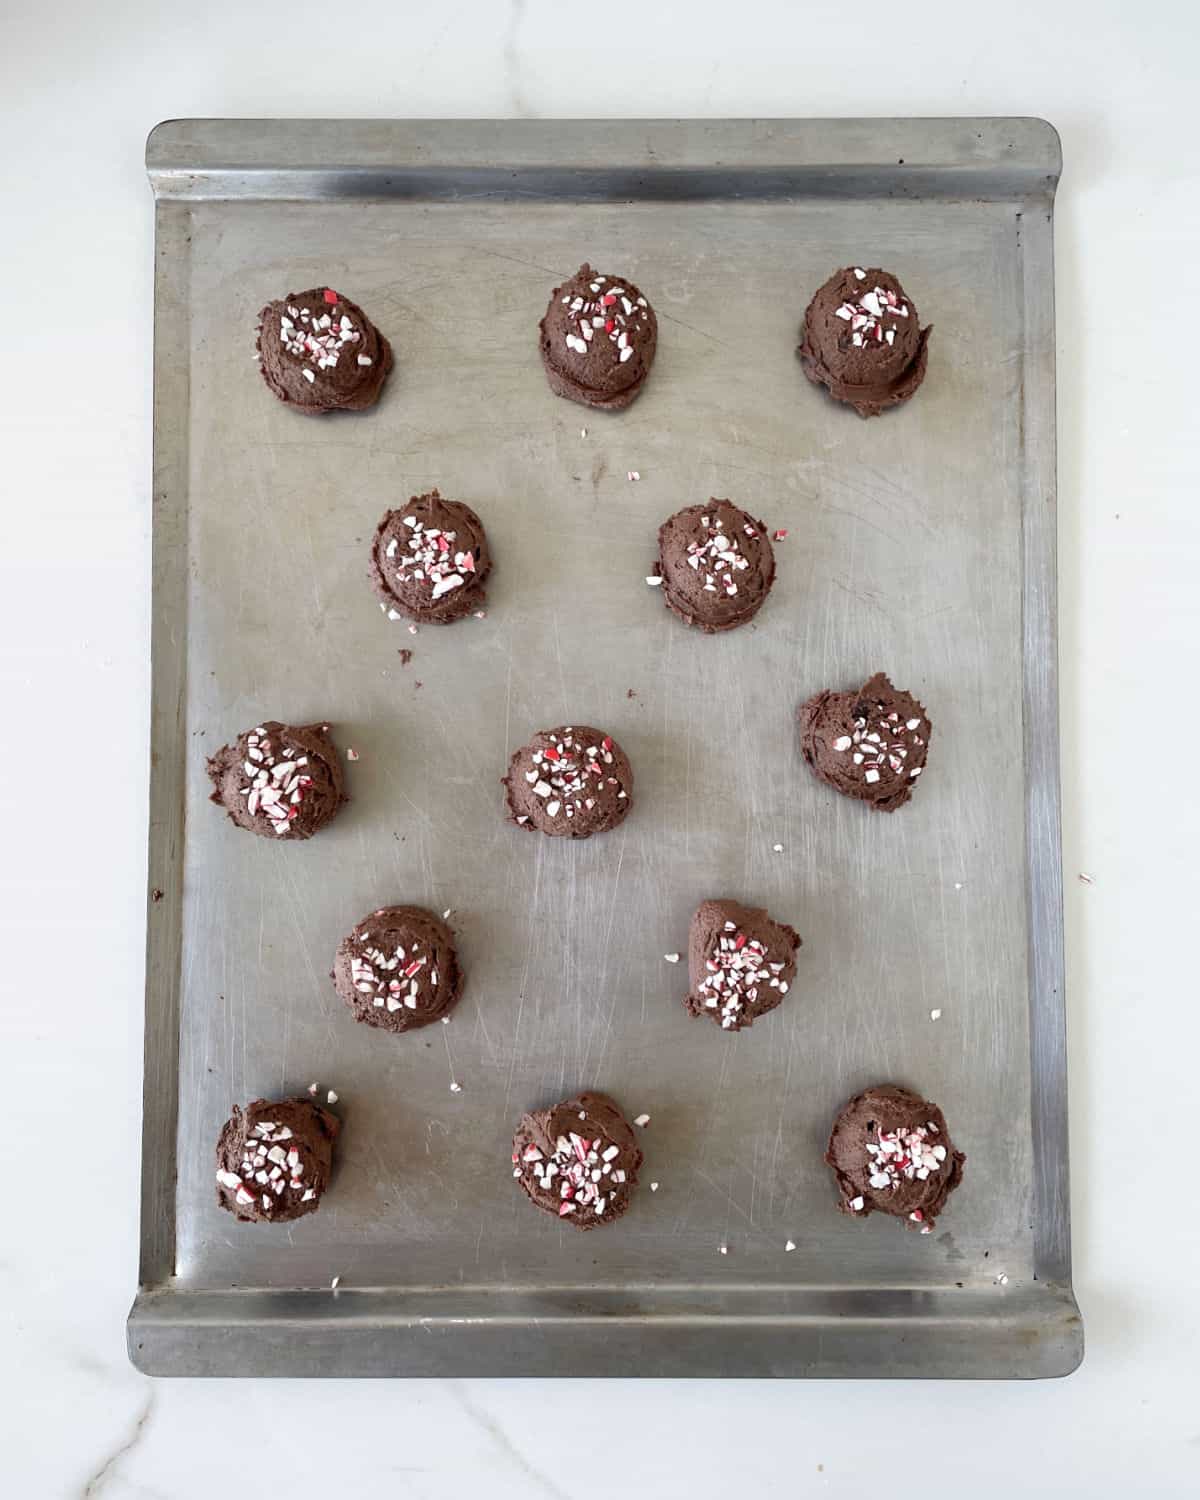 Metal baking sheet with chocolate cookie dough balls with crushed peppermint candy. Top view.